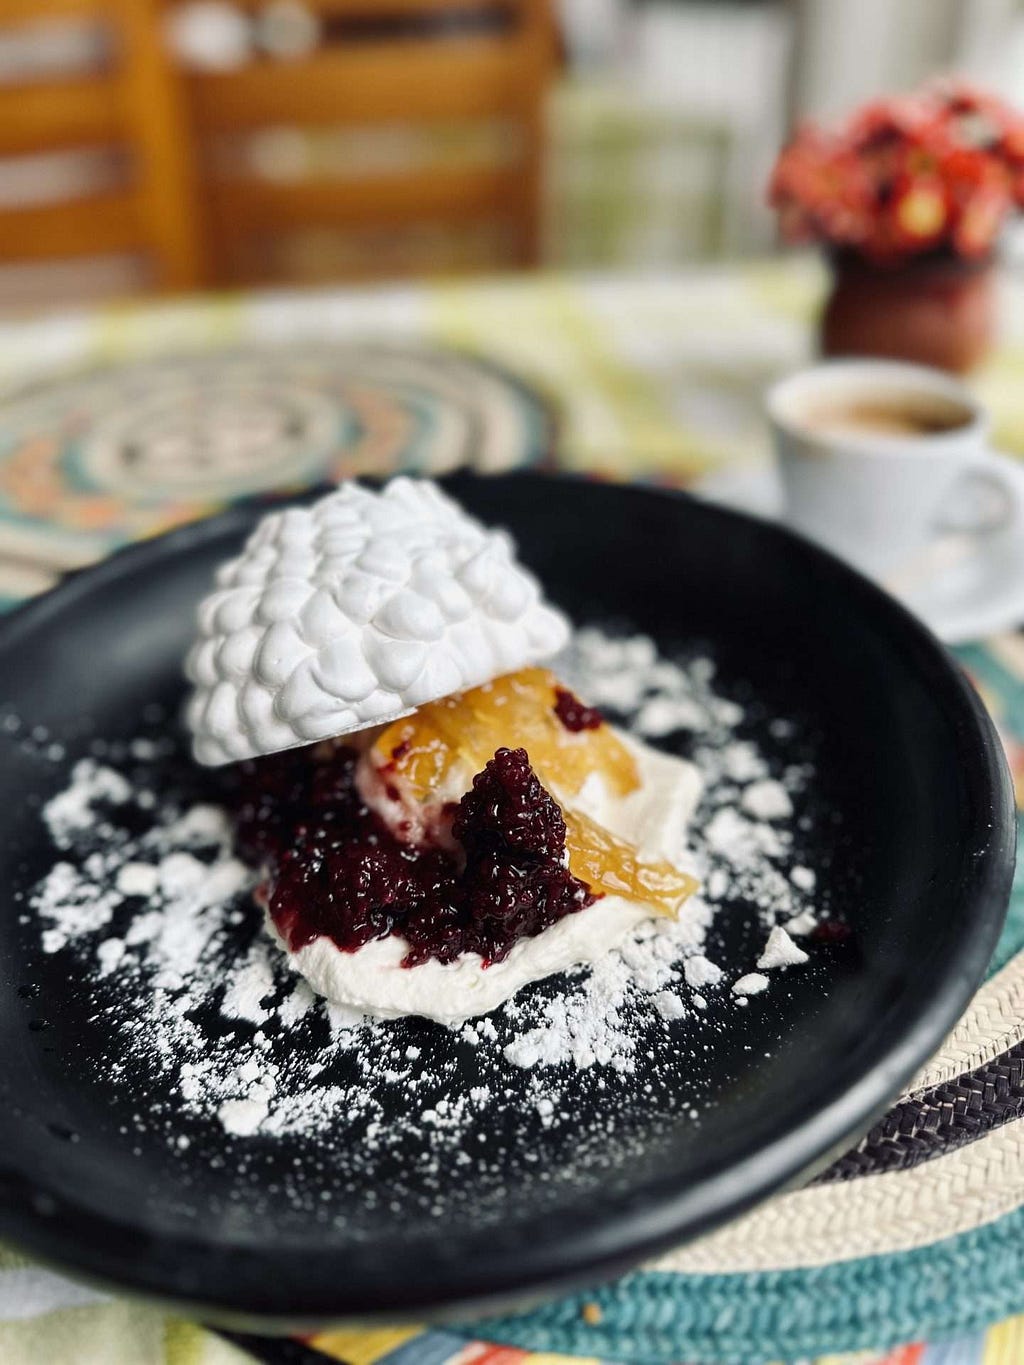 Meruengón, a dessert with meringue, berry sauce, and fruit is dusted with powdered sugar on a black plate. A cup of coffee and a small flower arrangement are in the background.